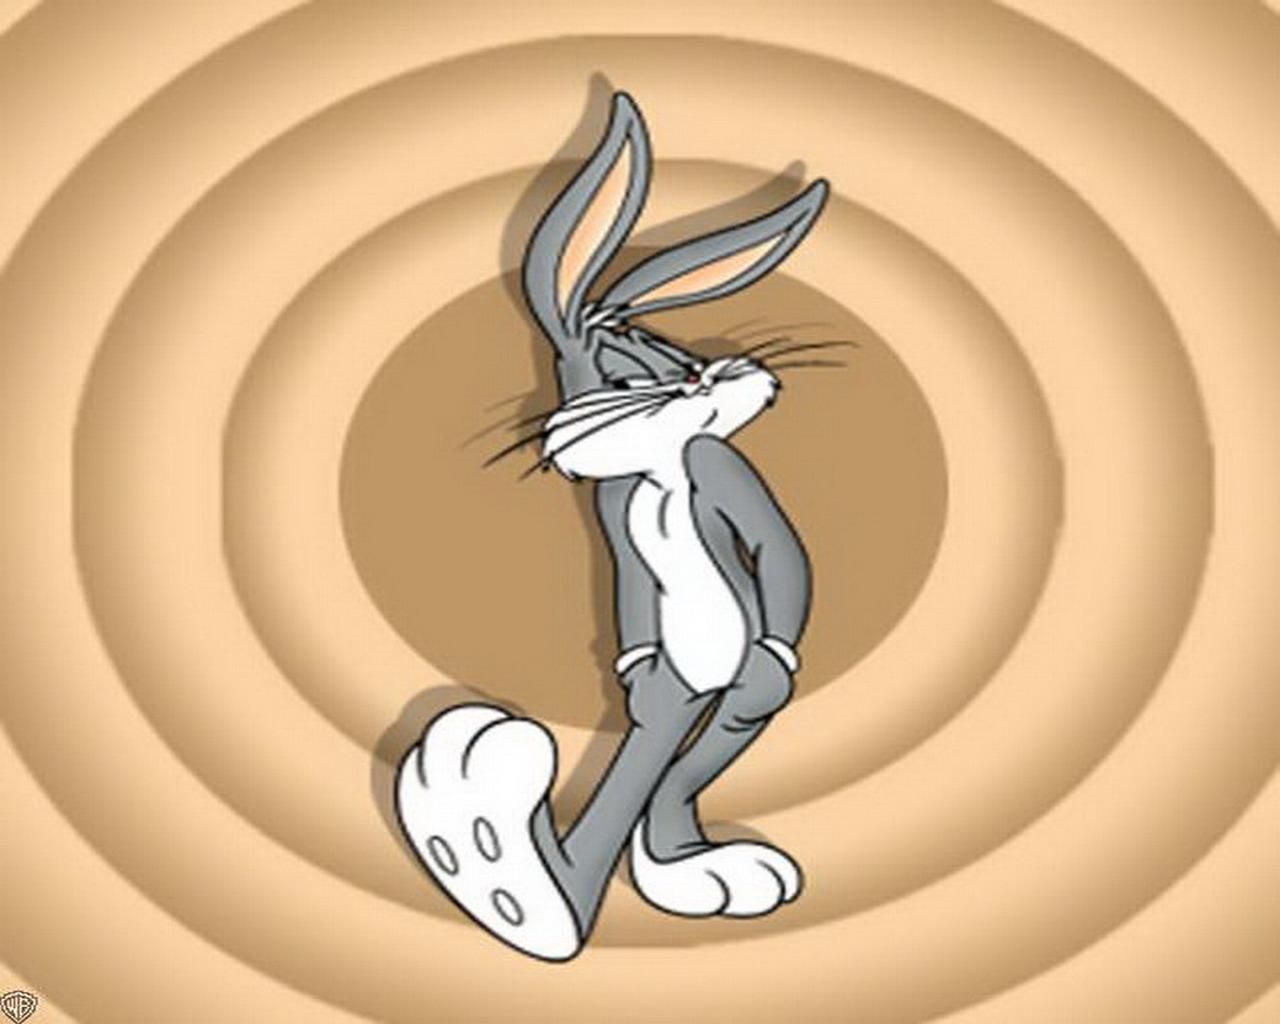 Looney Tunes - Bugs Bunny Wallpapers - HD Wallpapers 7877